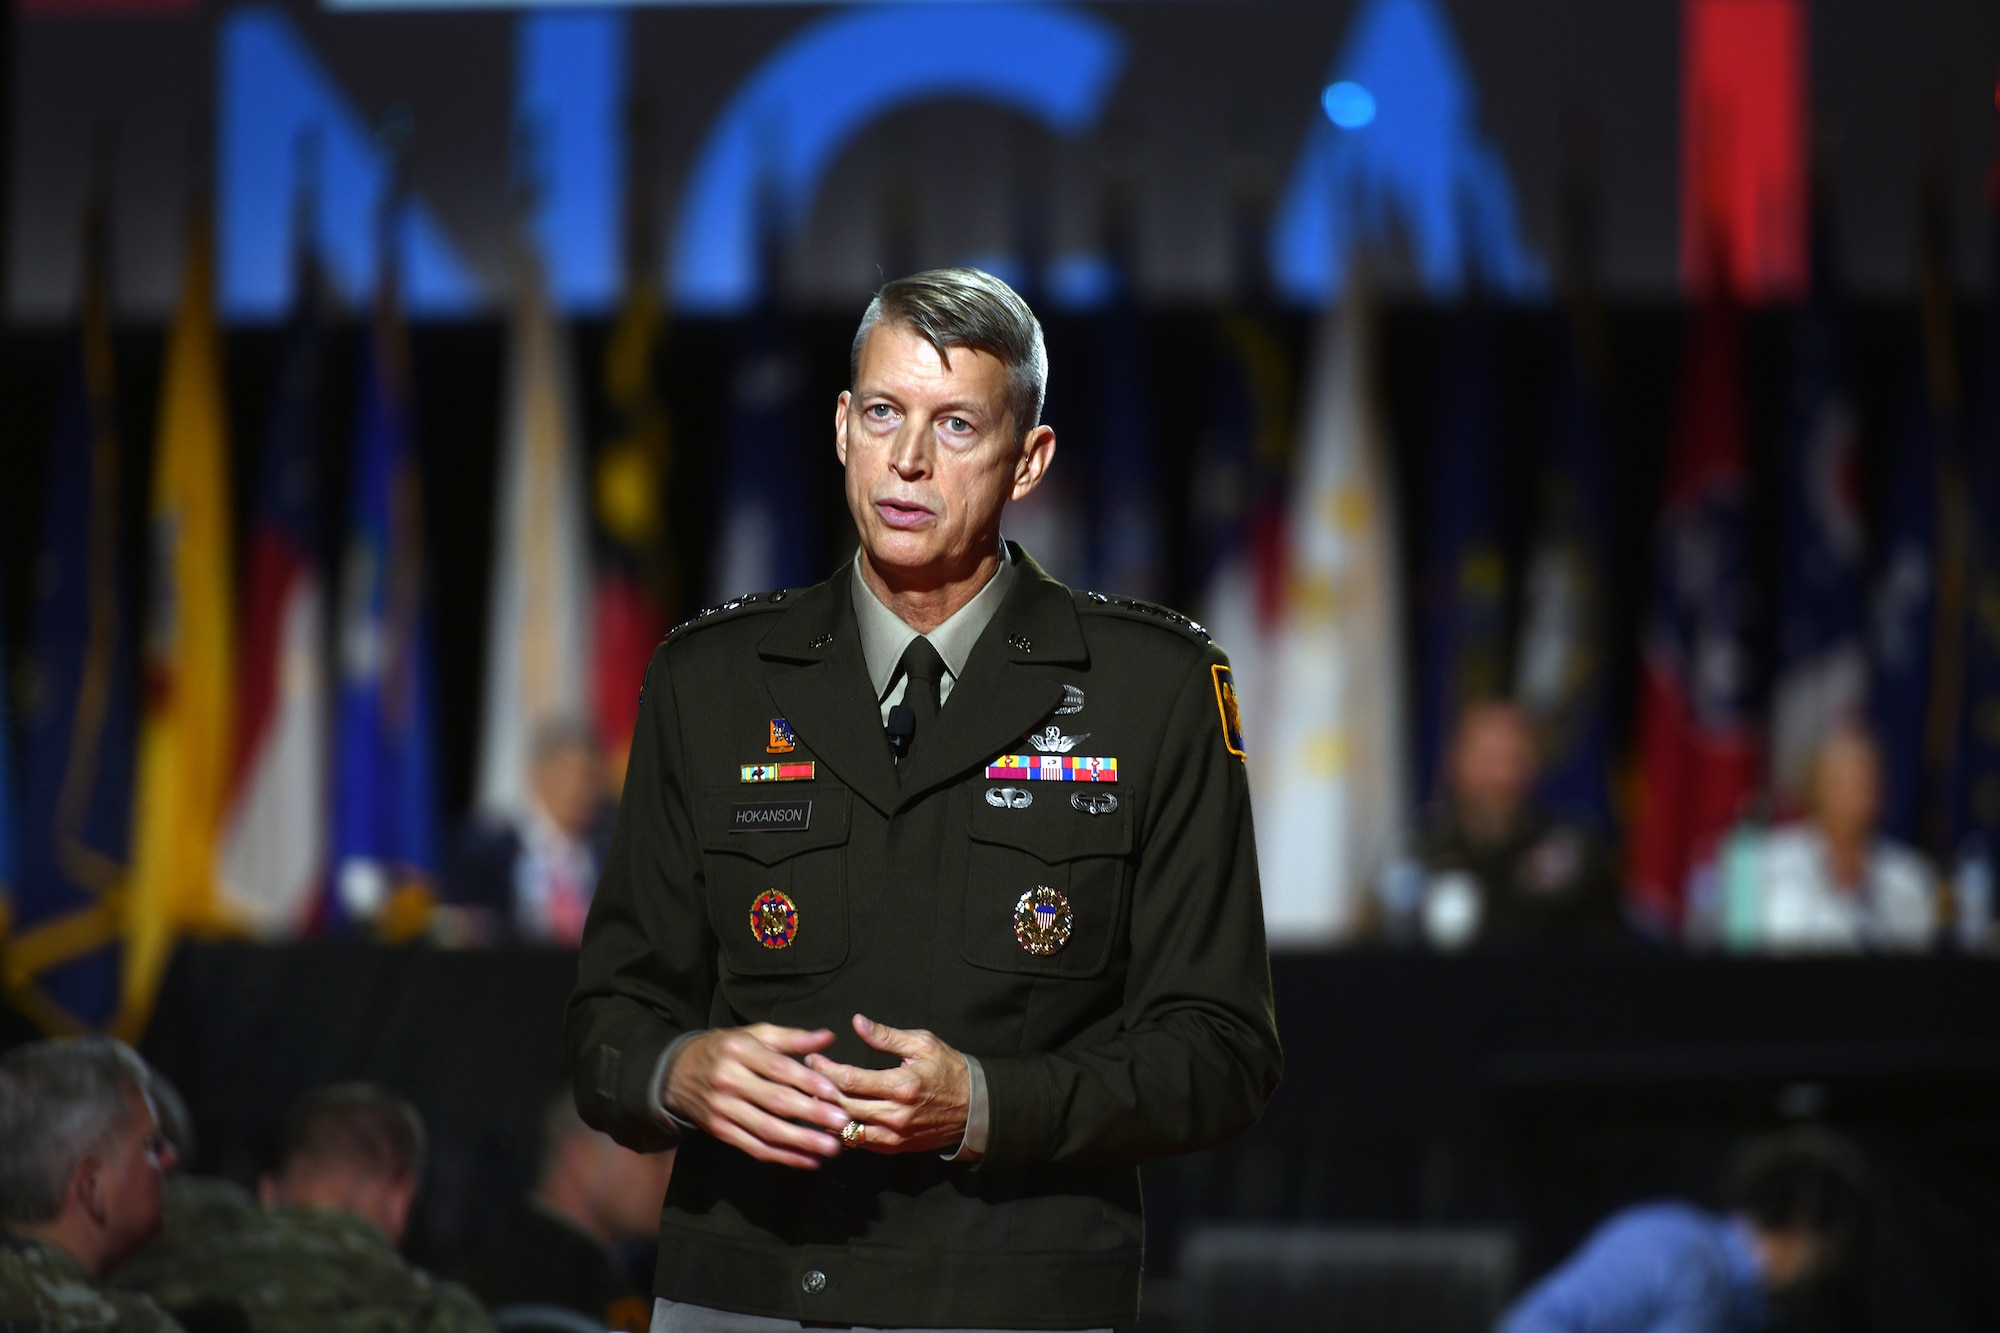 “The 2022 National Defense Strategy is clear,” Army Gen. Daniel Hokanson told National Guard leaders meeting in Columbus, Ohio, Aug. 29, 2022. “Mutually beneficial alliances and partnerships are an enduring strength. They are critical for achieving our objectives – and we have been doing it for almost 30 years.”